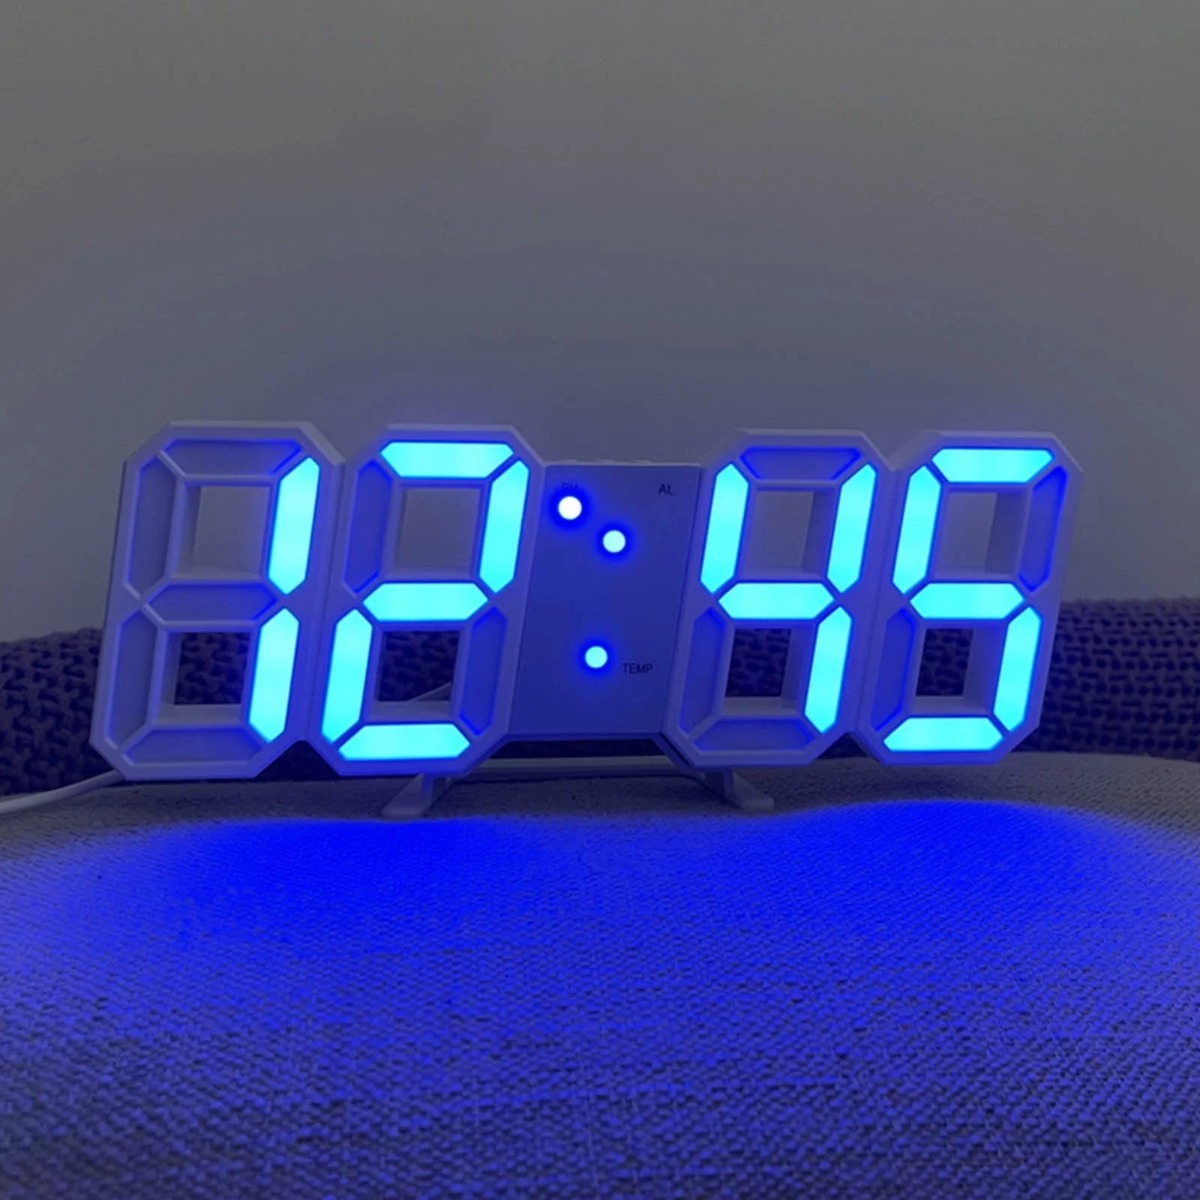 3D LED Wall Clock With Remote Price In Bangladesh